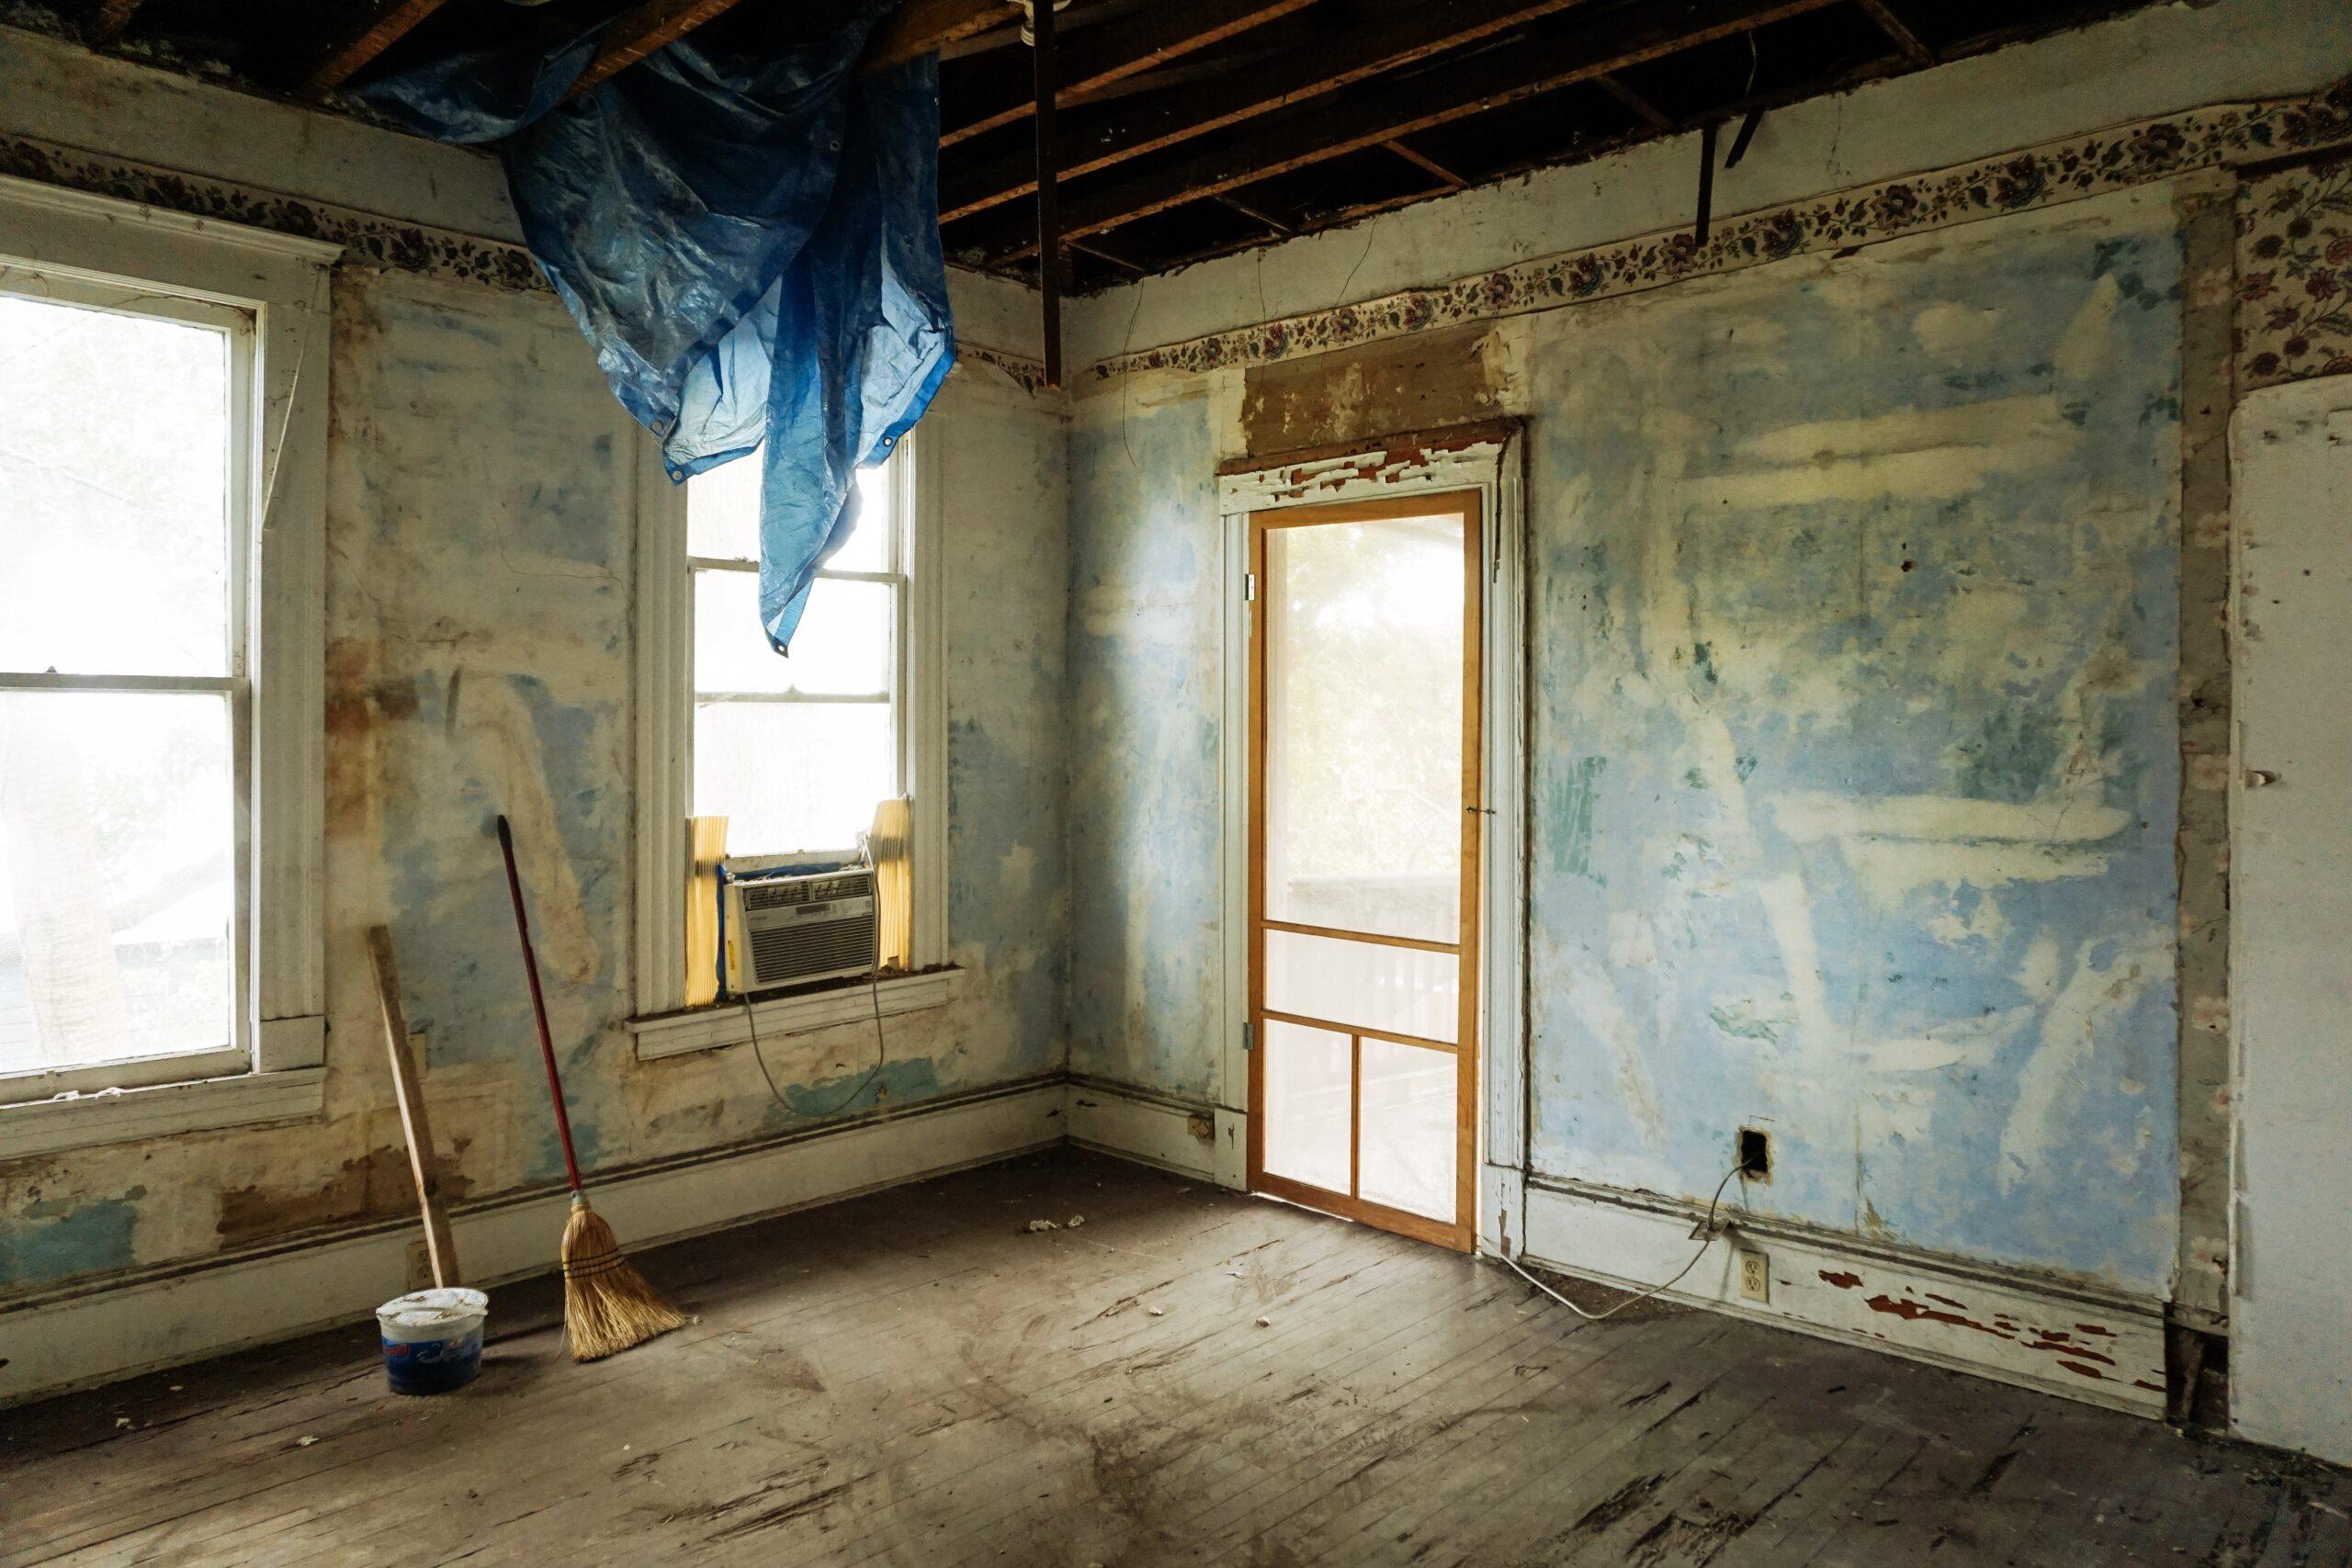 The Pros and Cons of Buying a Fixer Upper